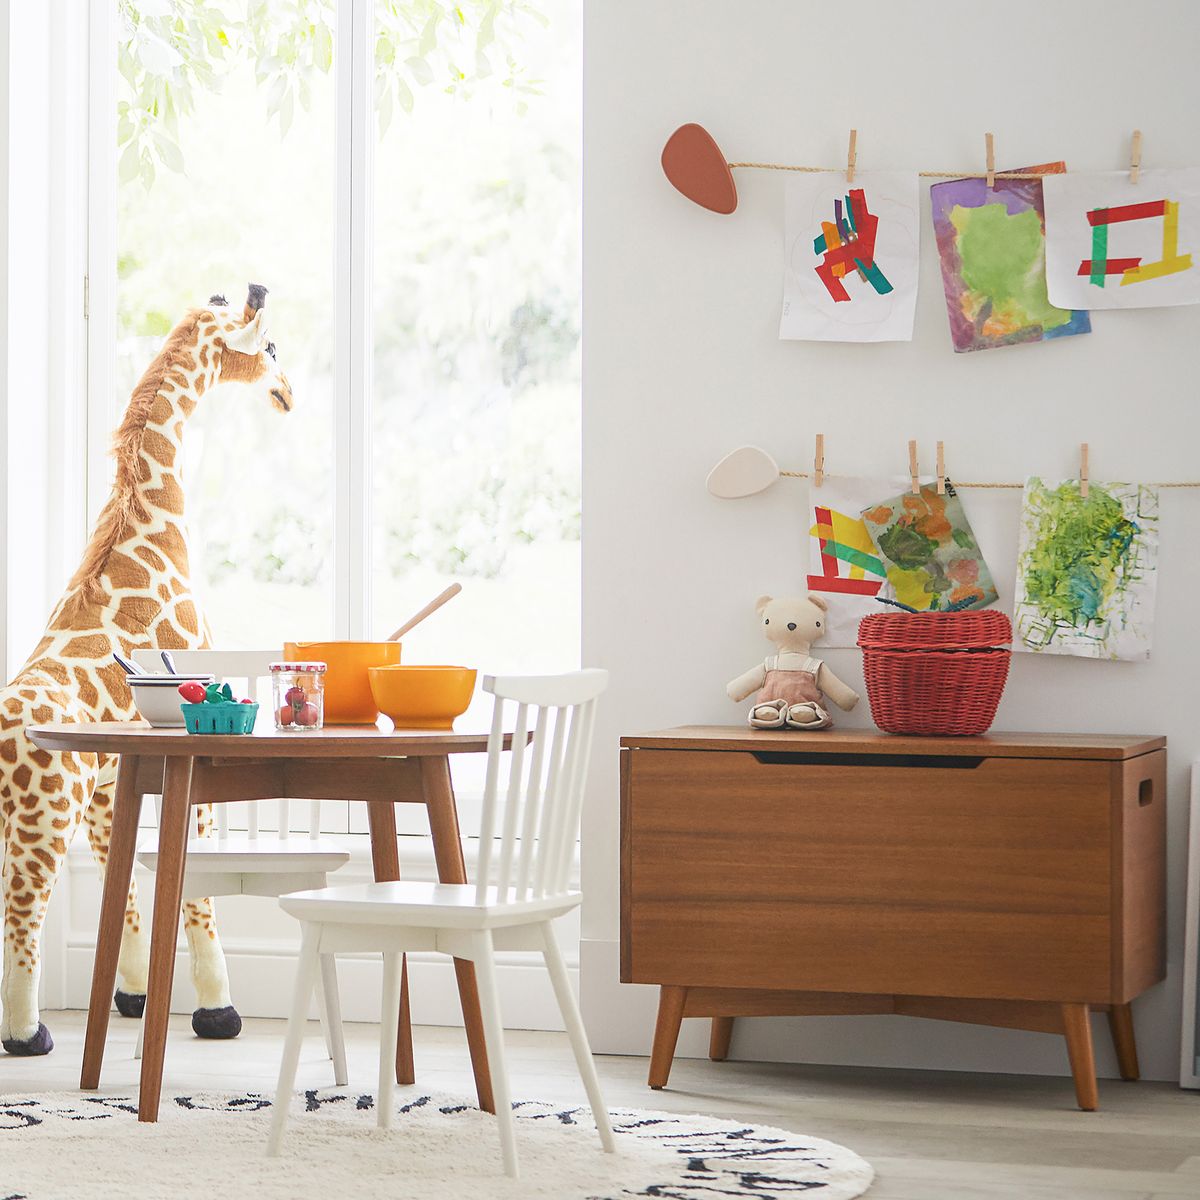 West Elm’s midcentury toy chest ($399, westelm.com) offers toy storage that can blend into a more grown-up space.  (West Elm)